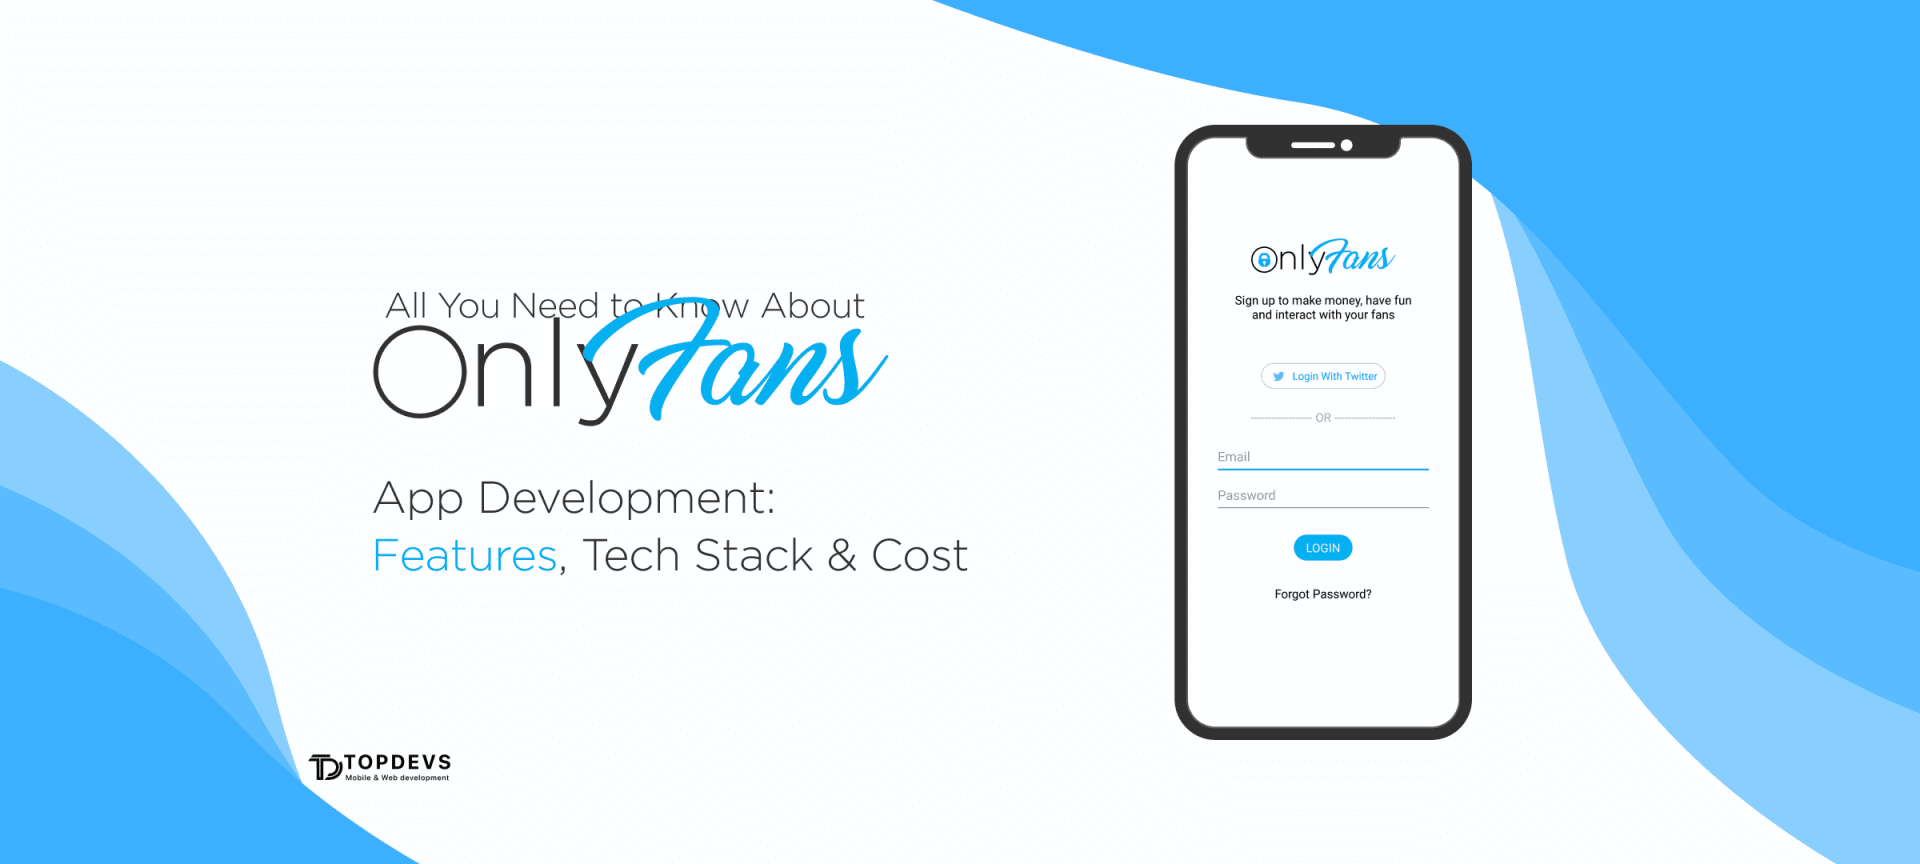 How to Make a Subscription-Based App Like OnlyFans - TopDevs Blog.